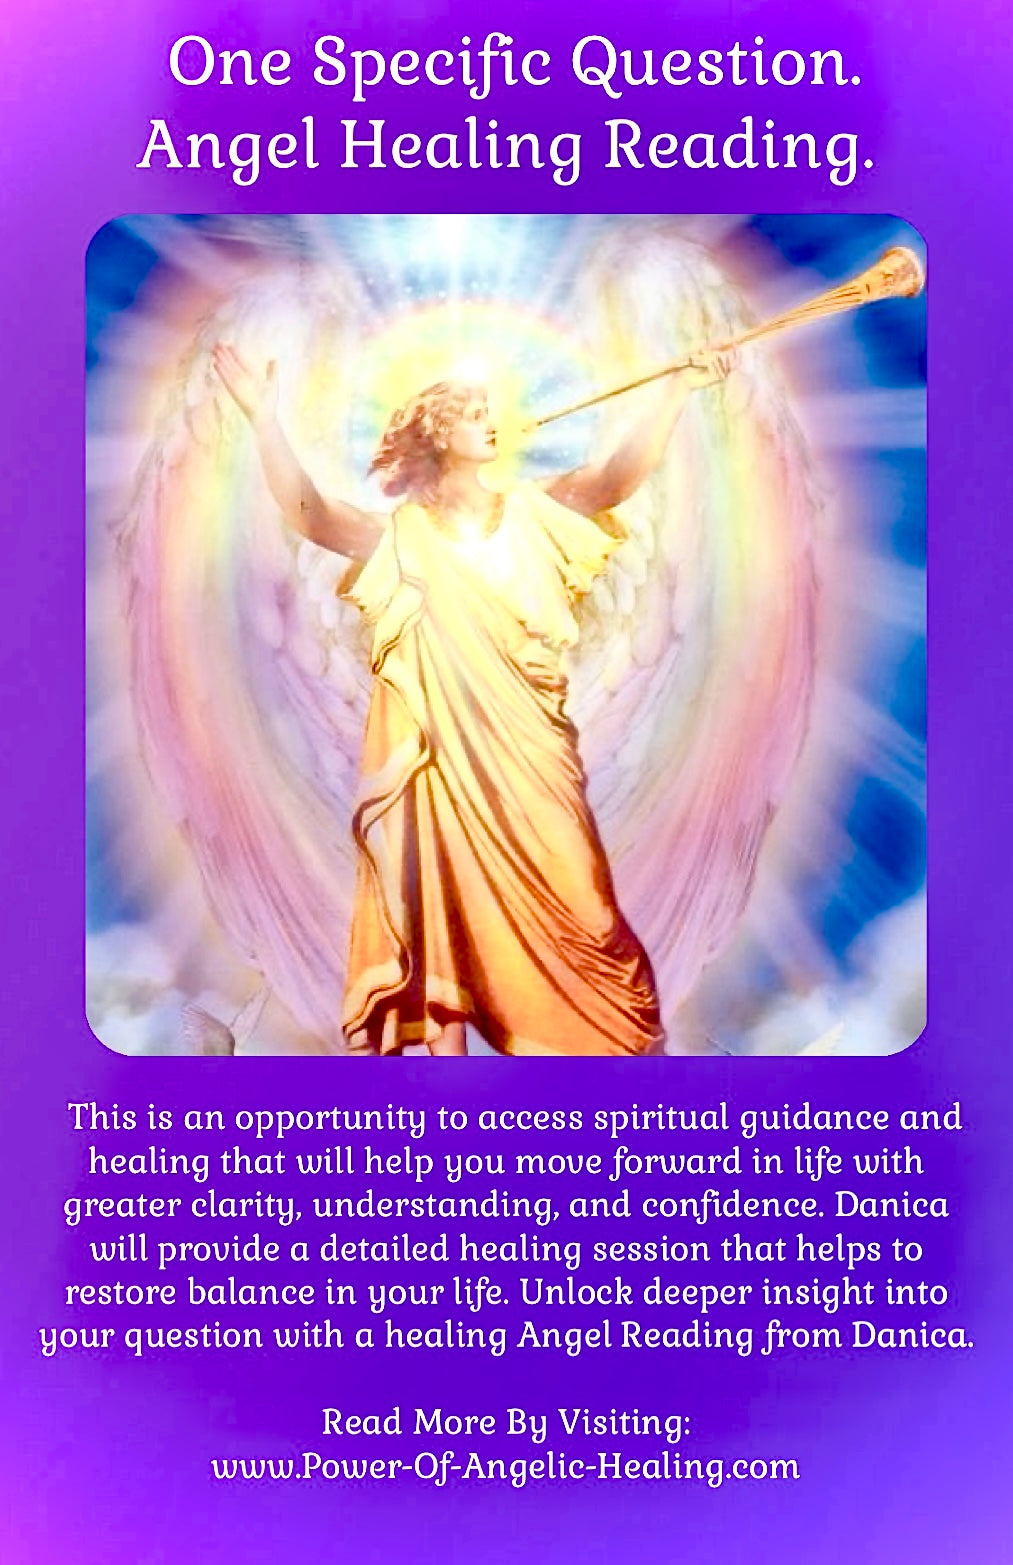 One Specific Question. Angel Healing Reading.